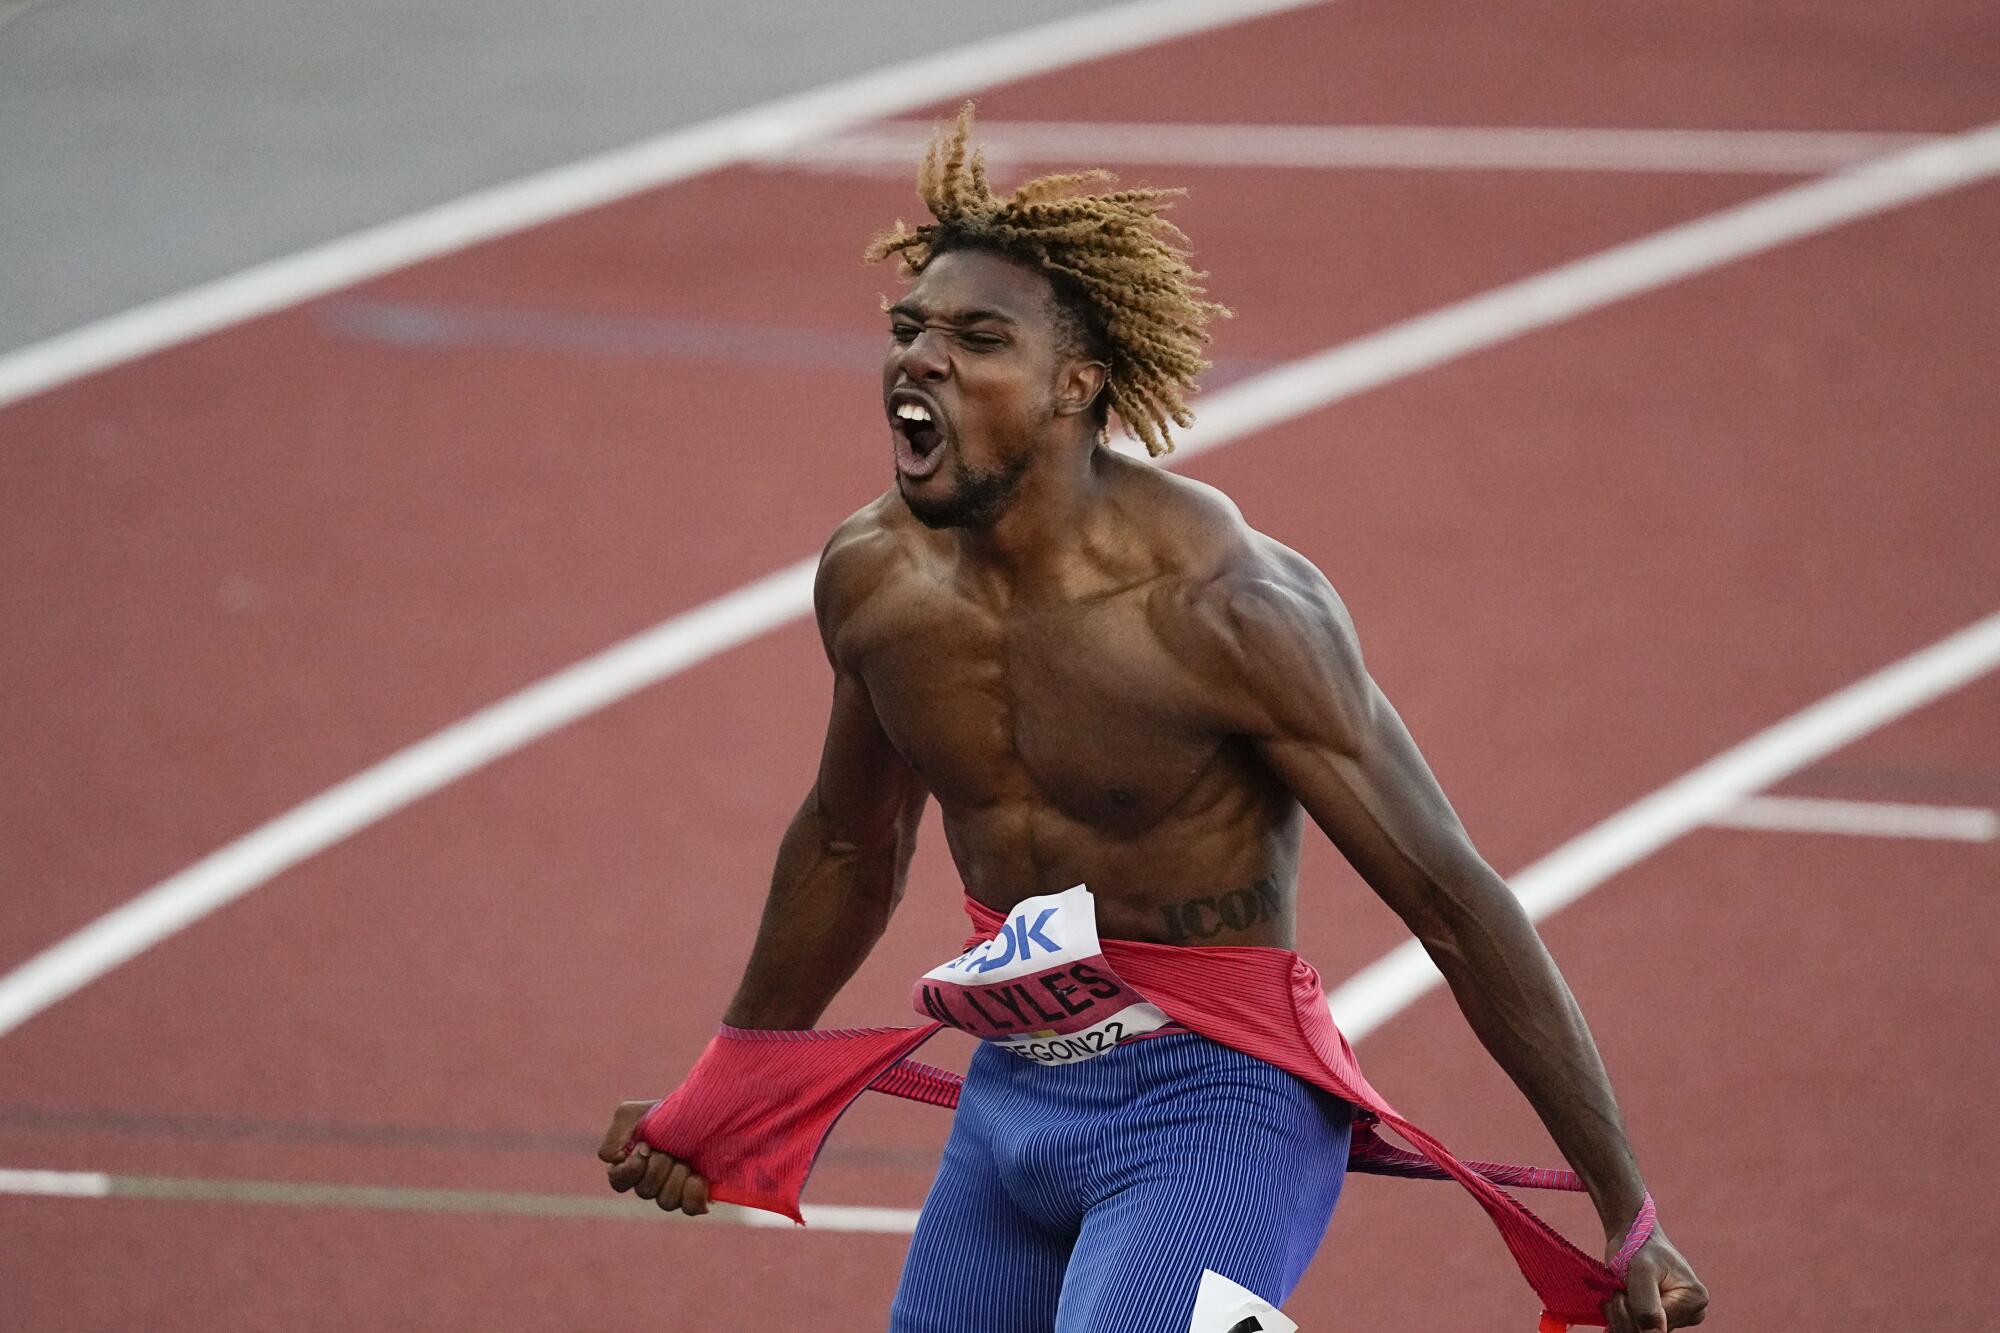 The fastest men in world sport: Who would win in a 100m race